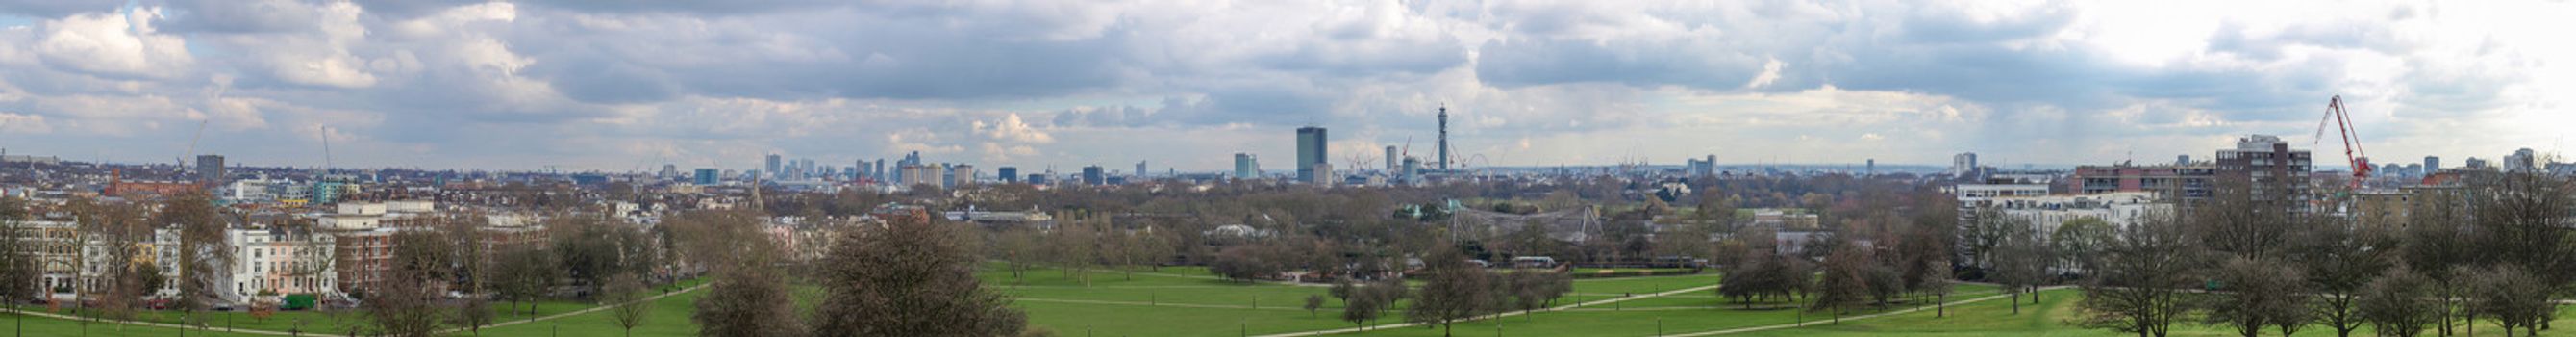 LONDON, UK - MARCH 05, 2009: Panoramic view of the city skyline seen from Primrose Hill